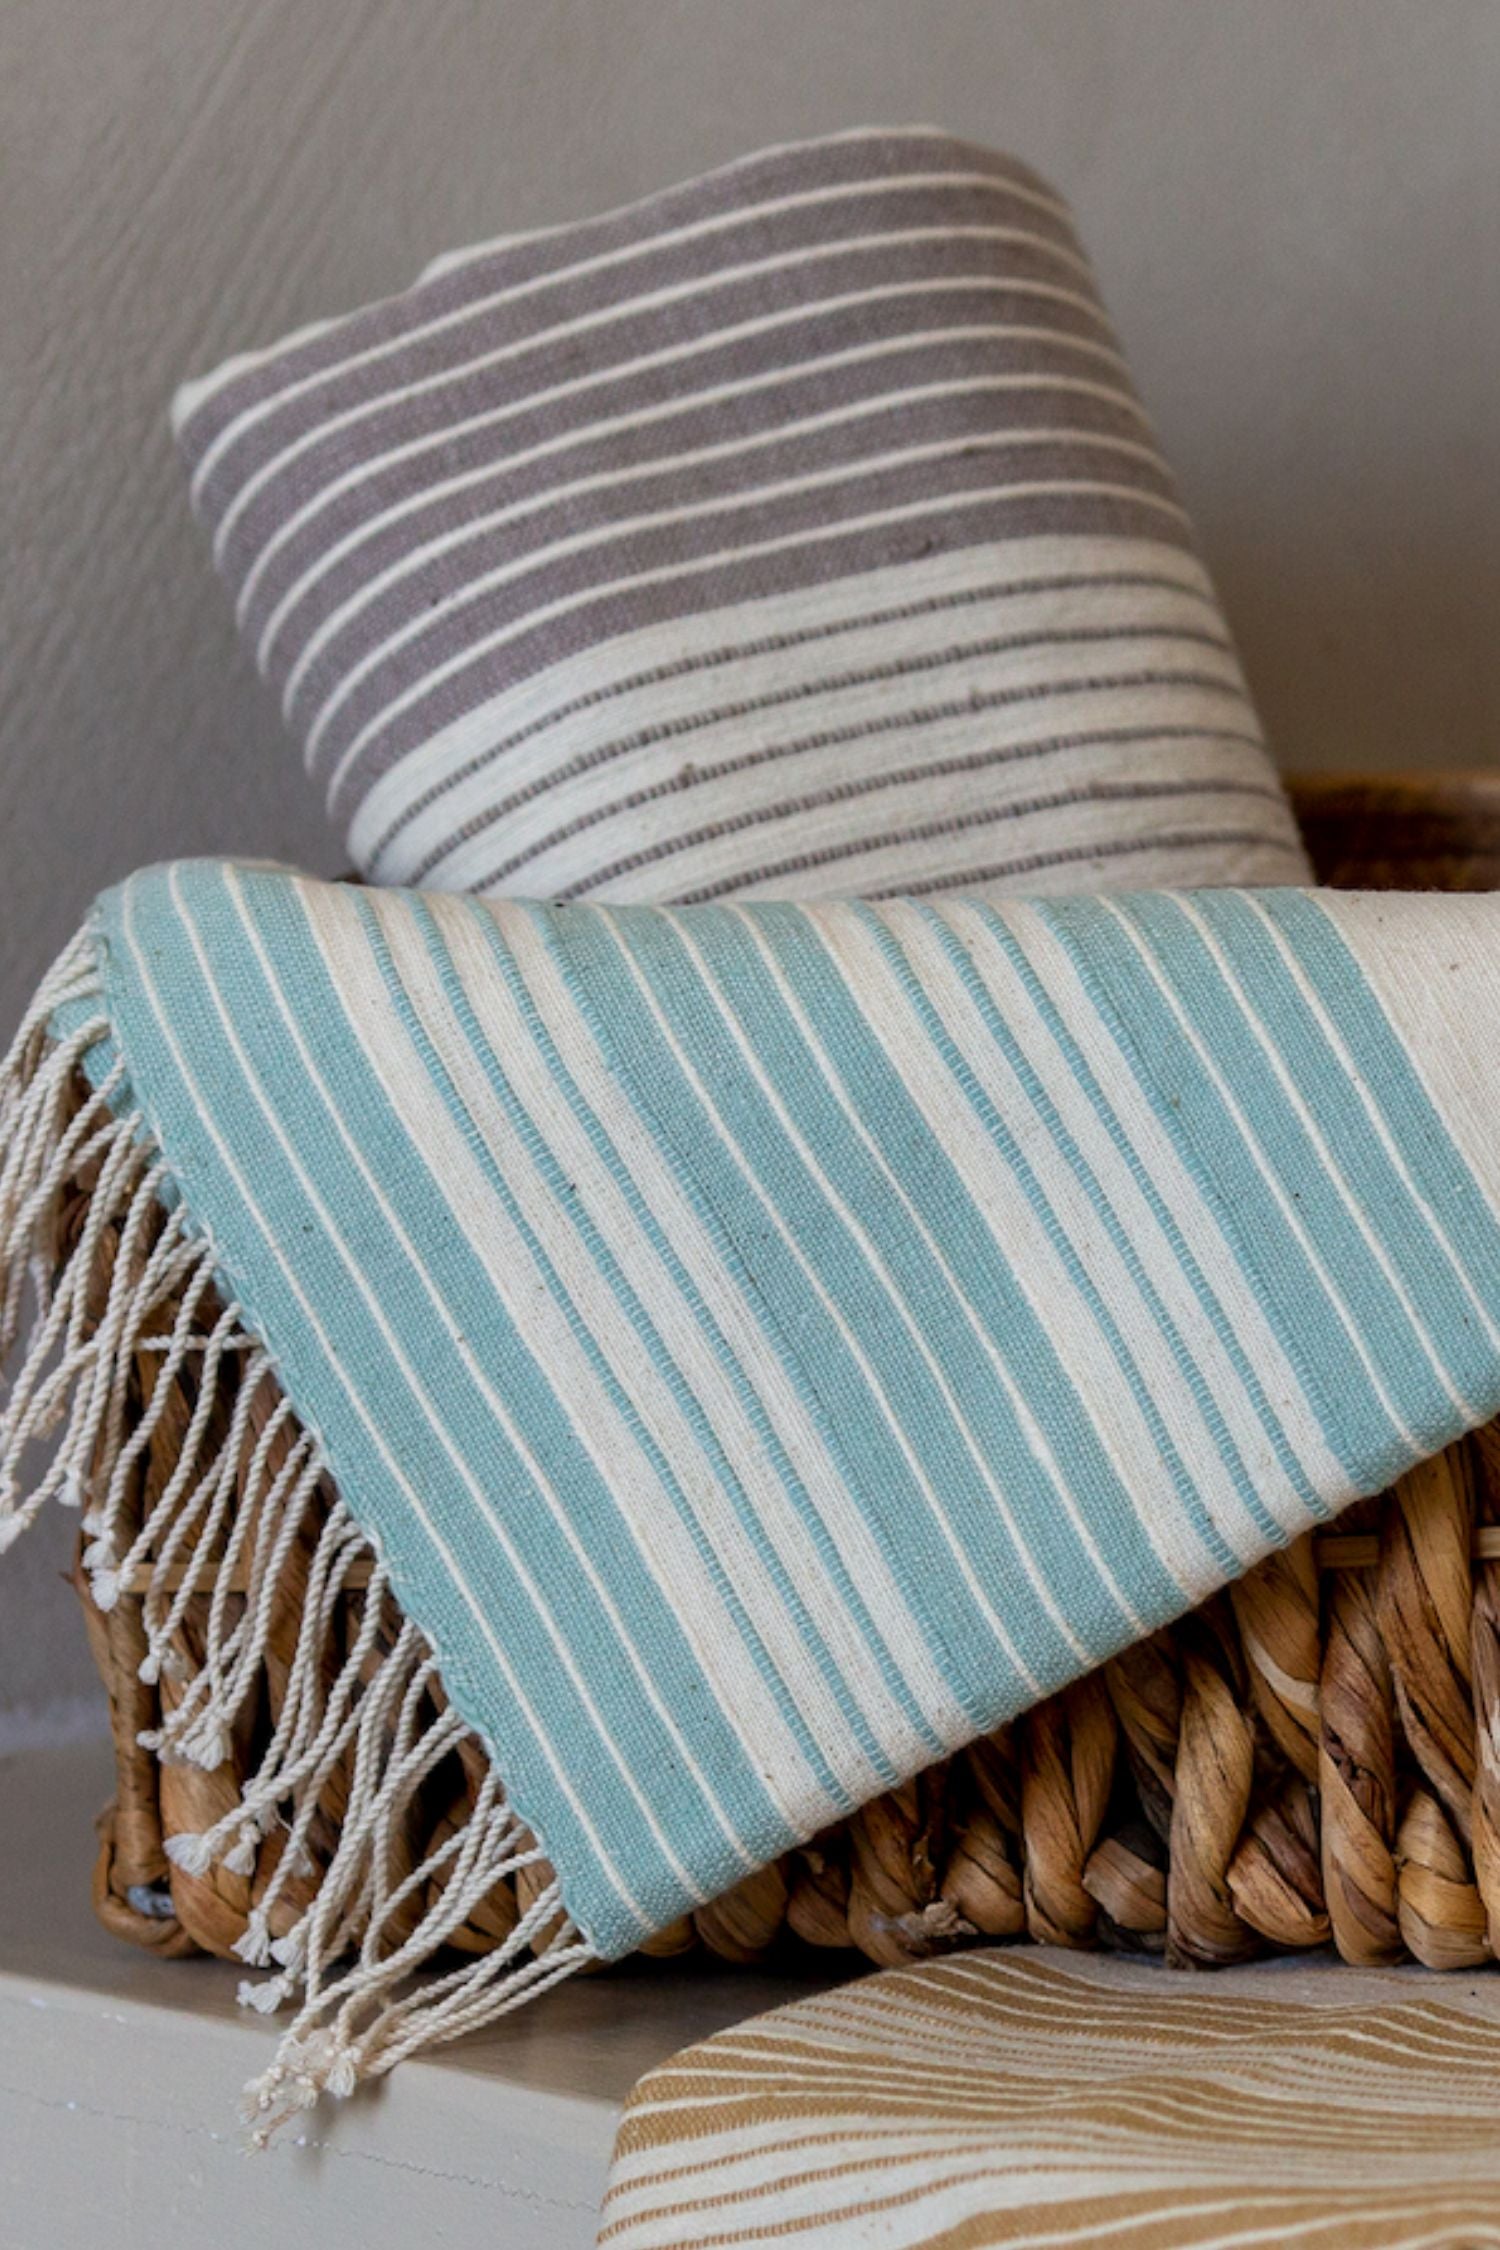 Large Striped Hand Towel - Stone